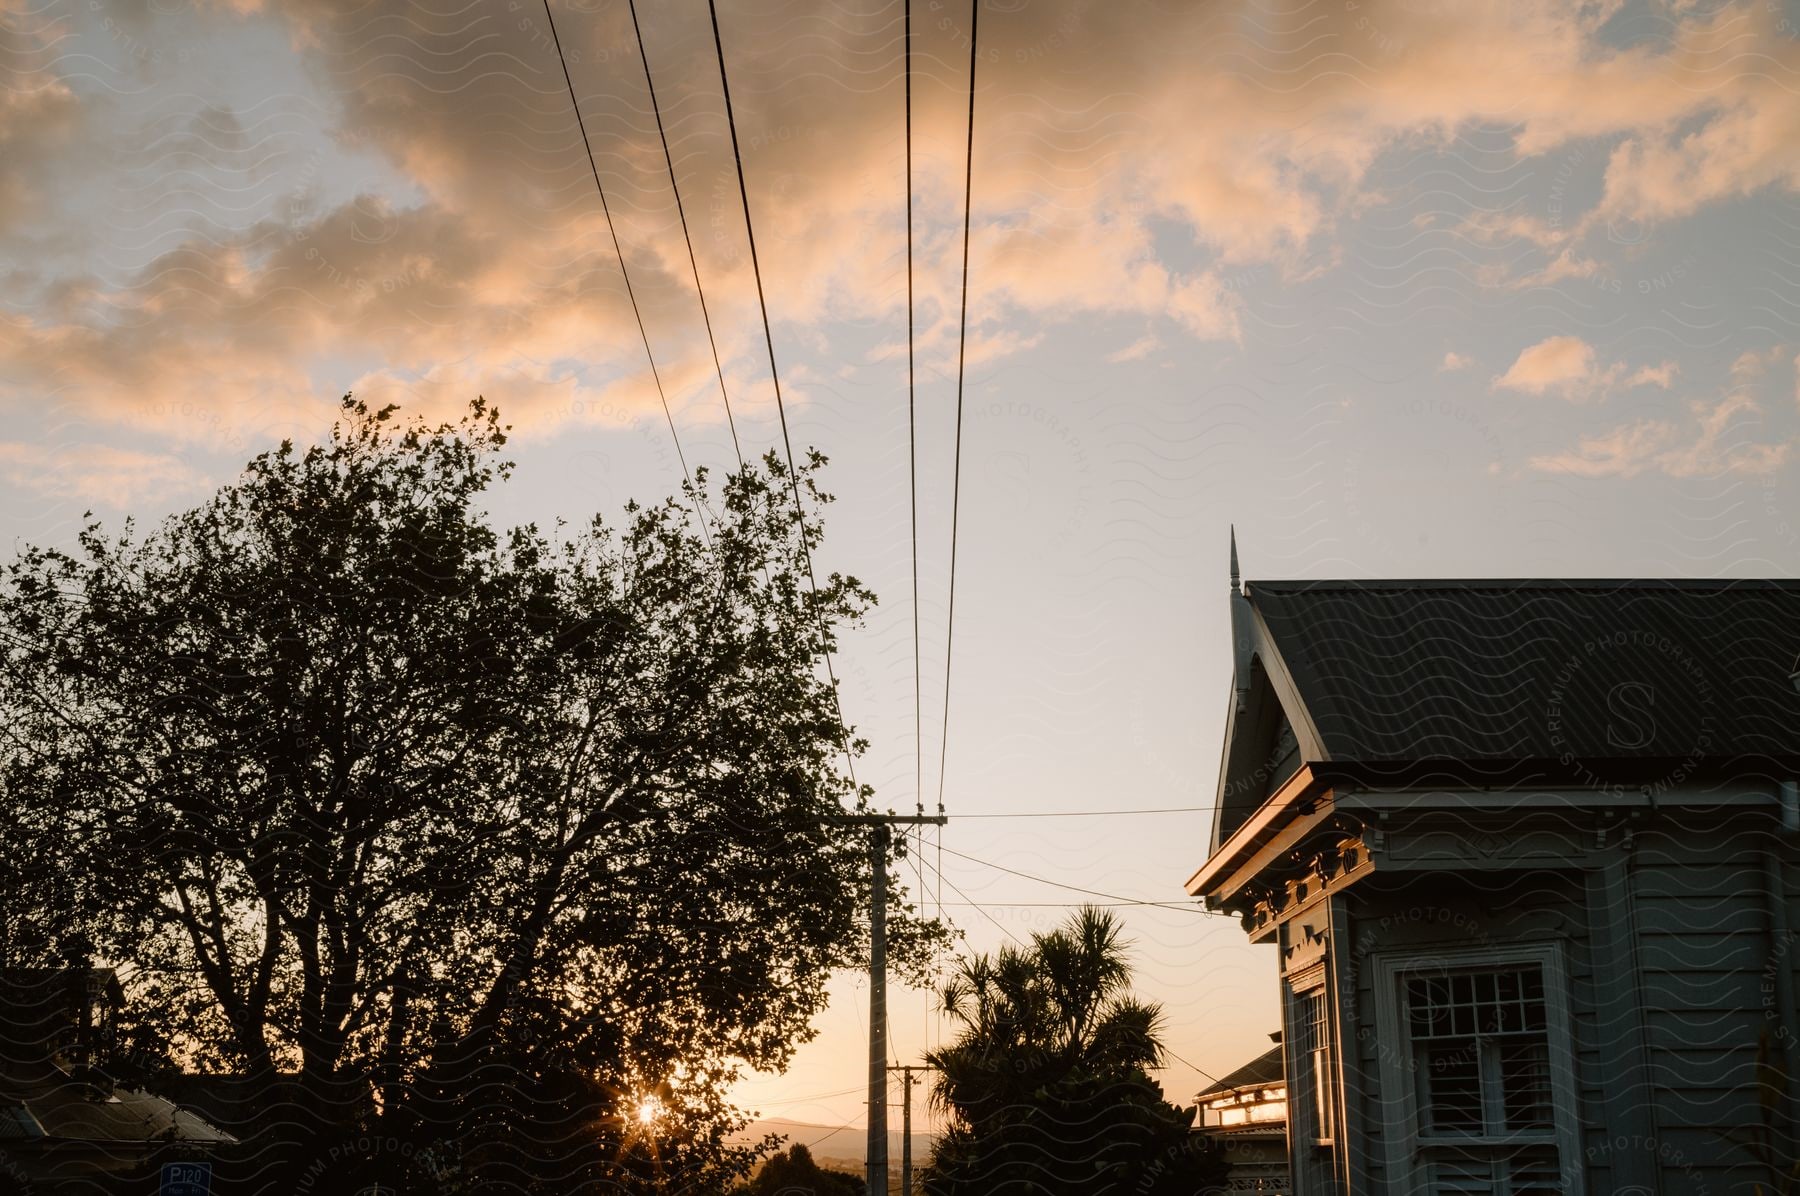 A suburban house with power lines and a tall tree in front as the sun sets on the horizon